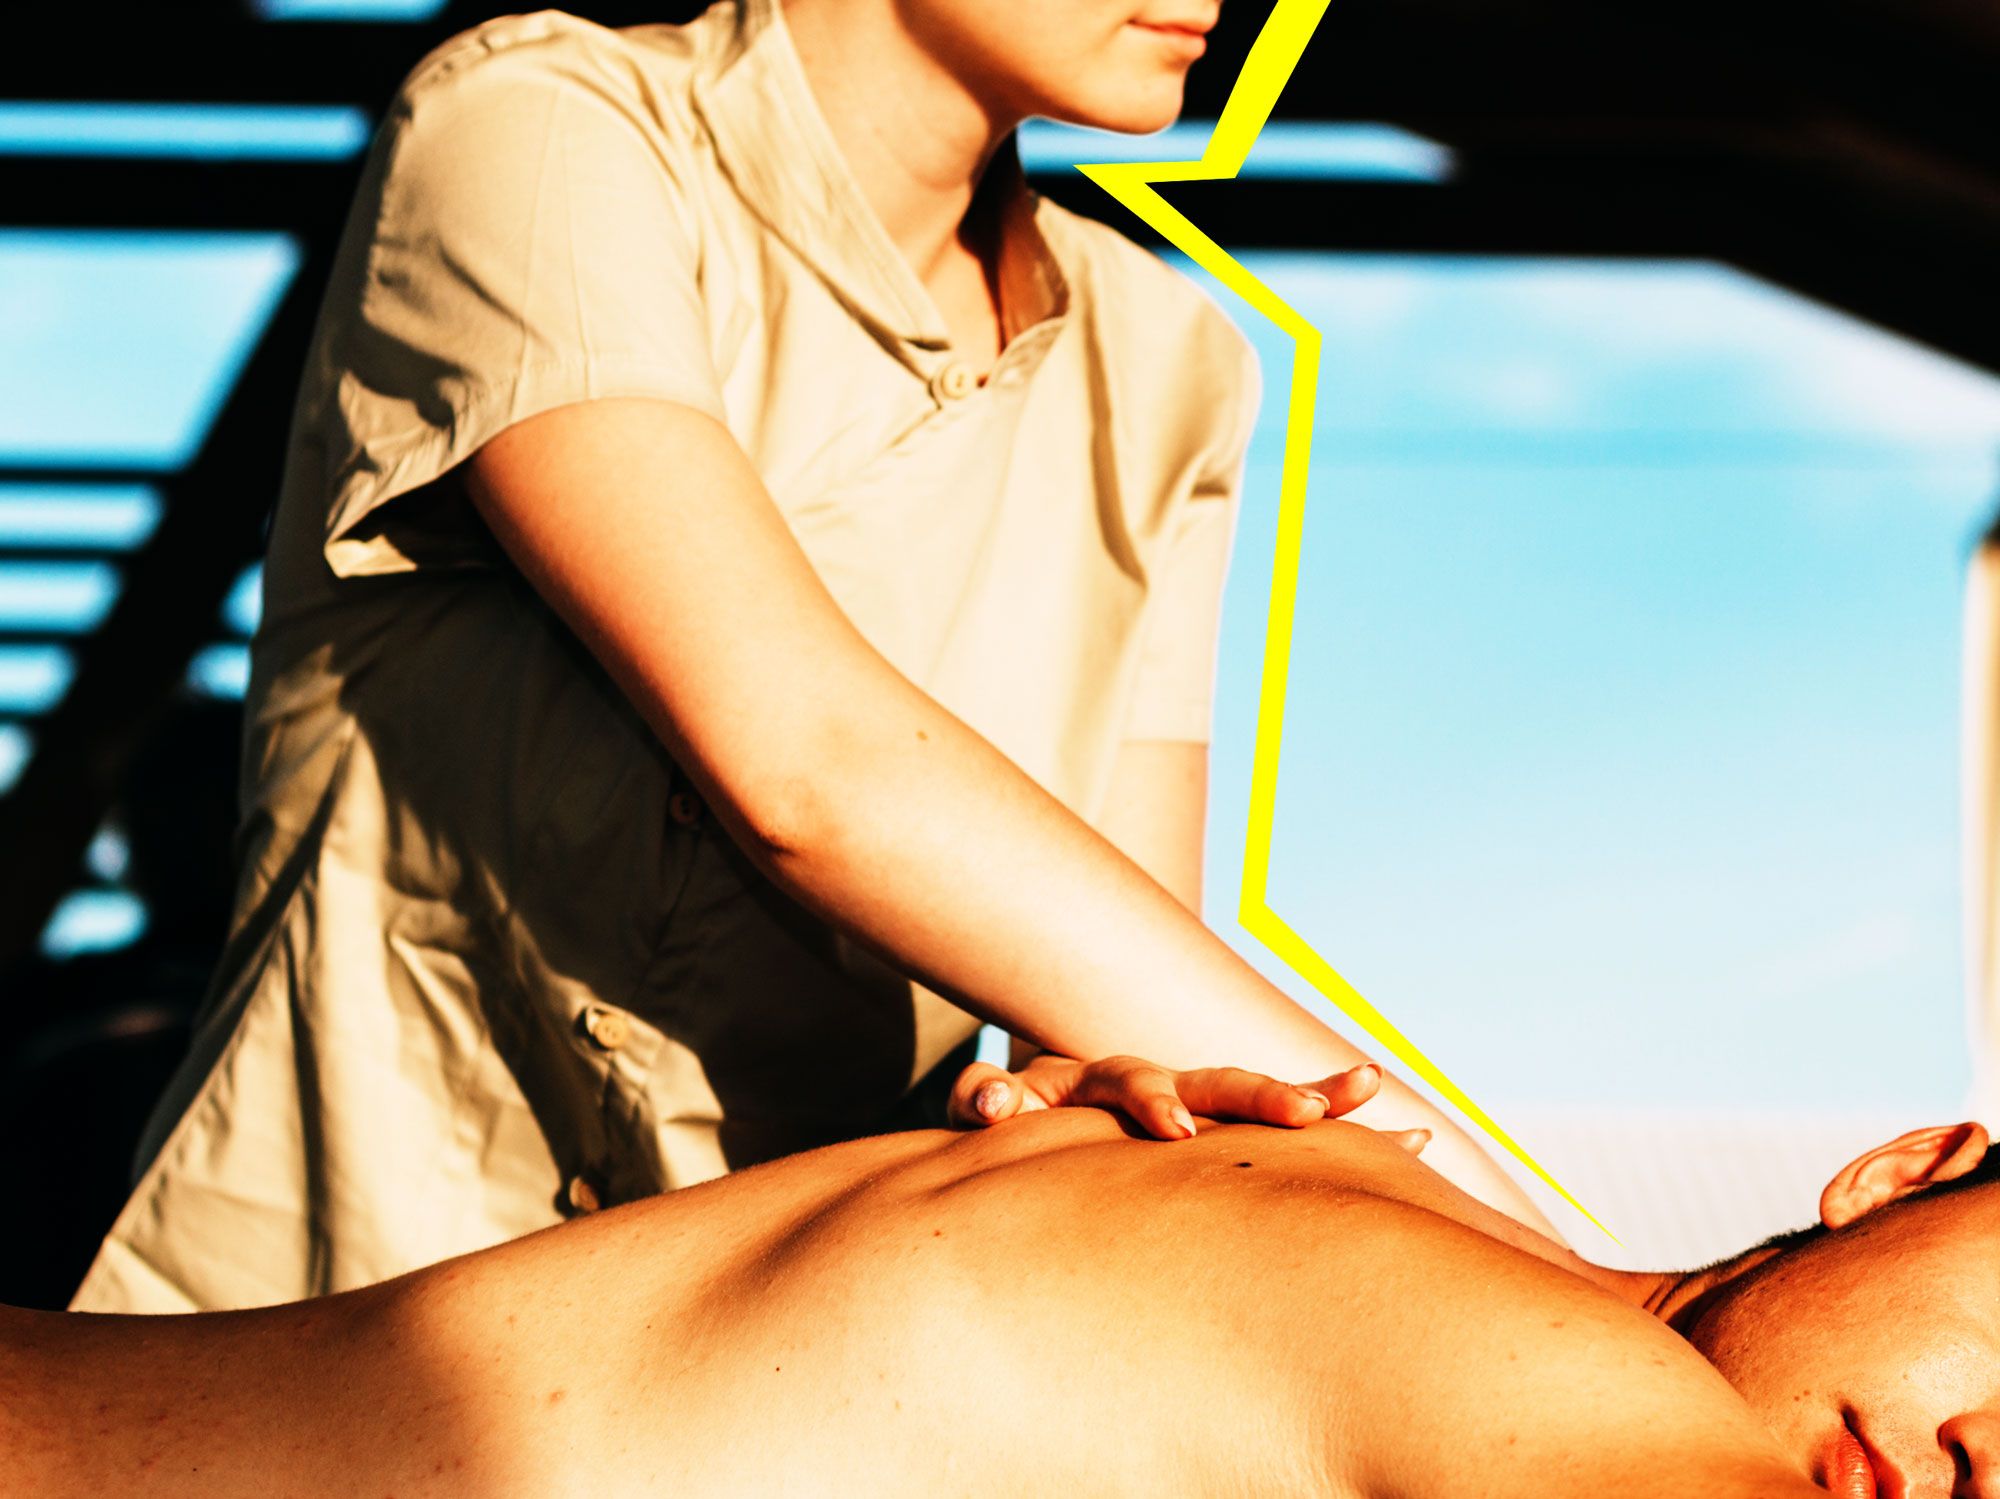 12 Massage Therapists On Sexual Harassment at Work pic